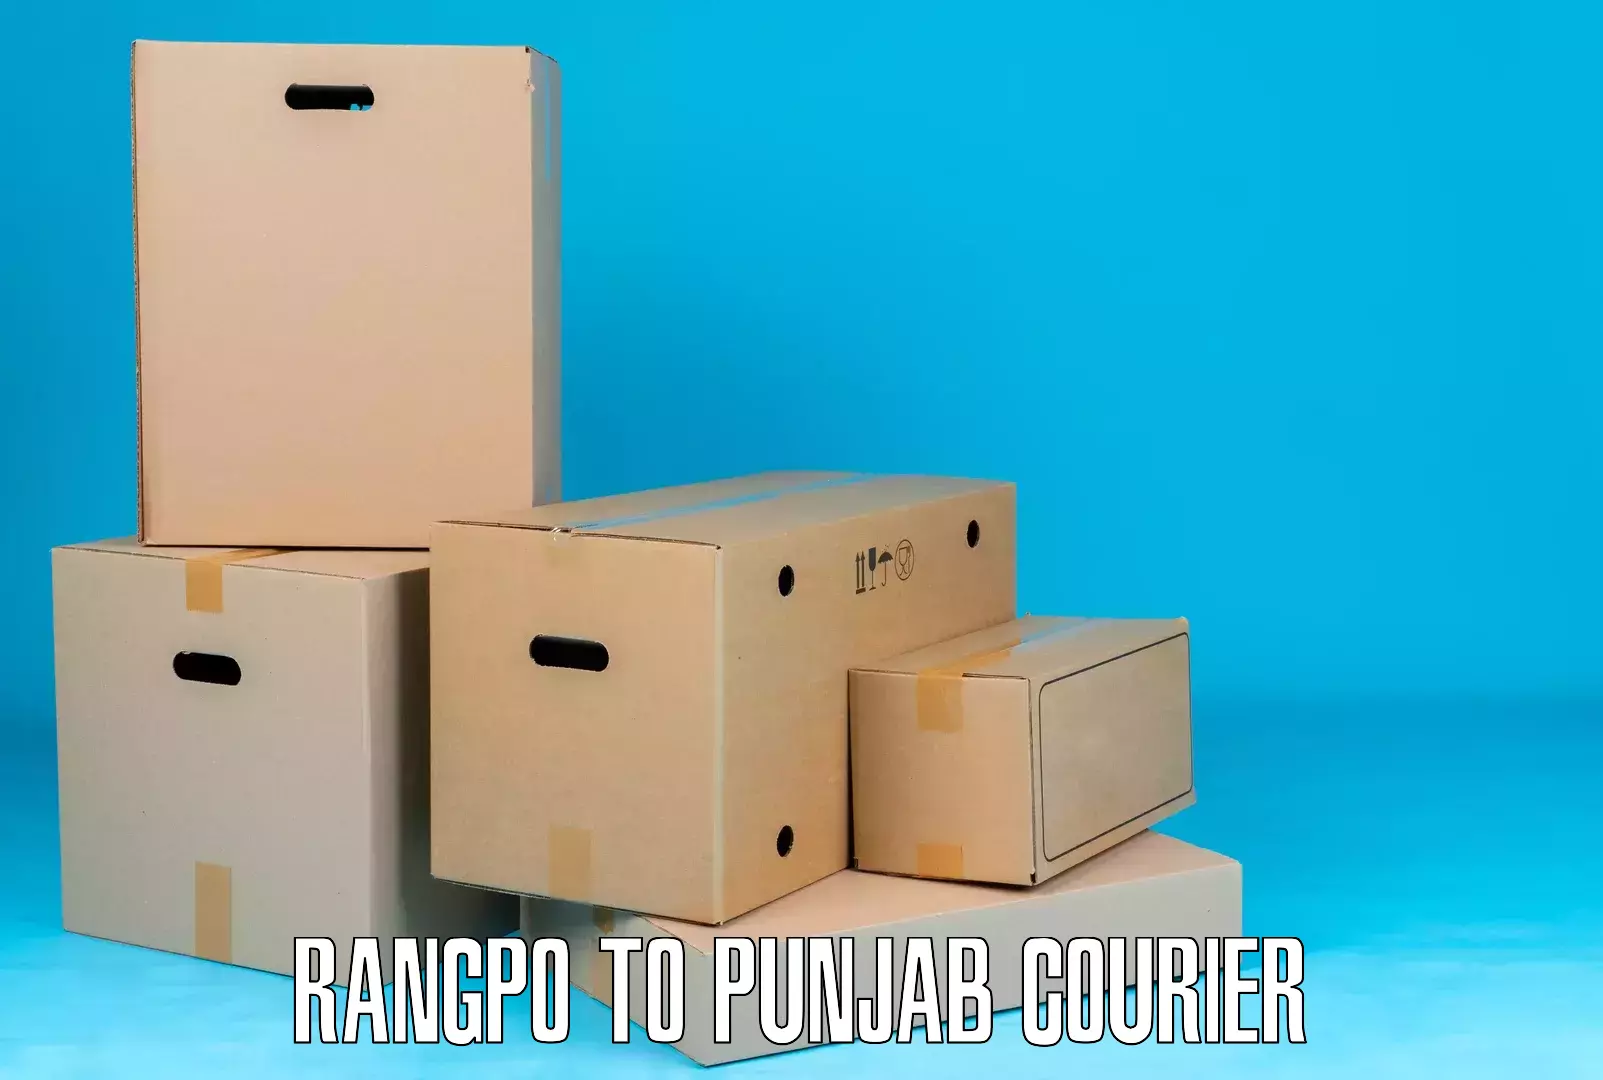 Air courier services Rangpo to Punjab